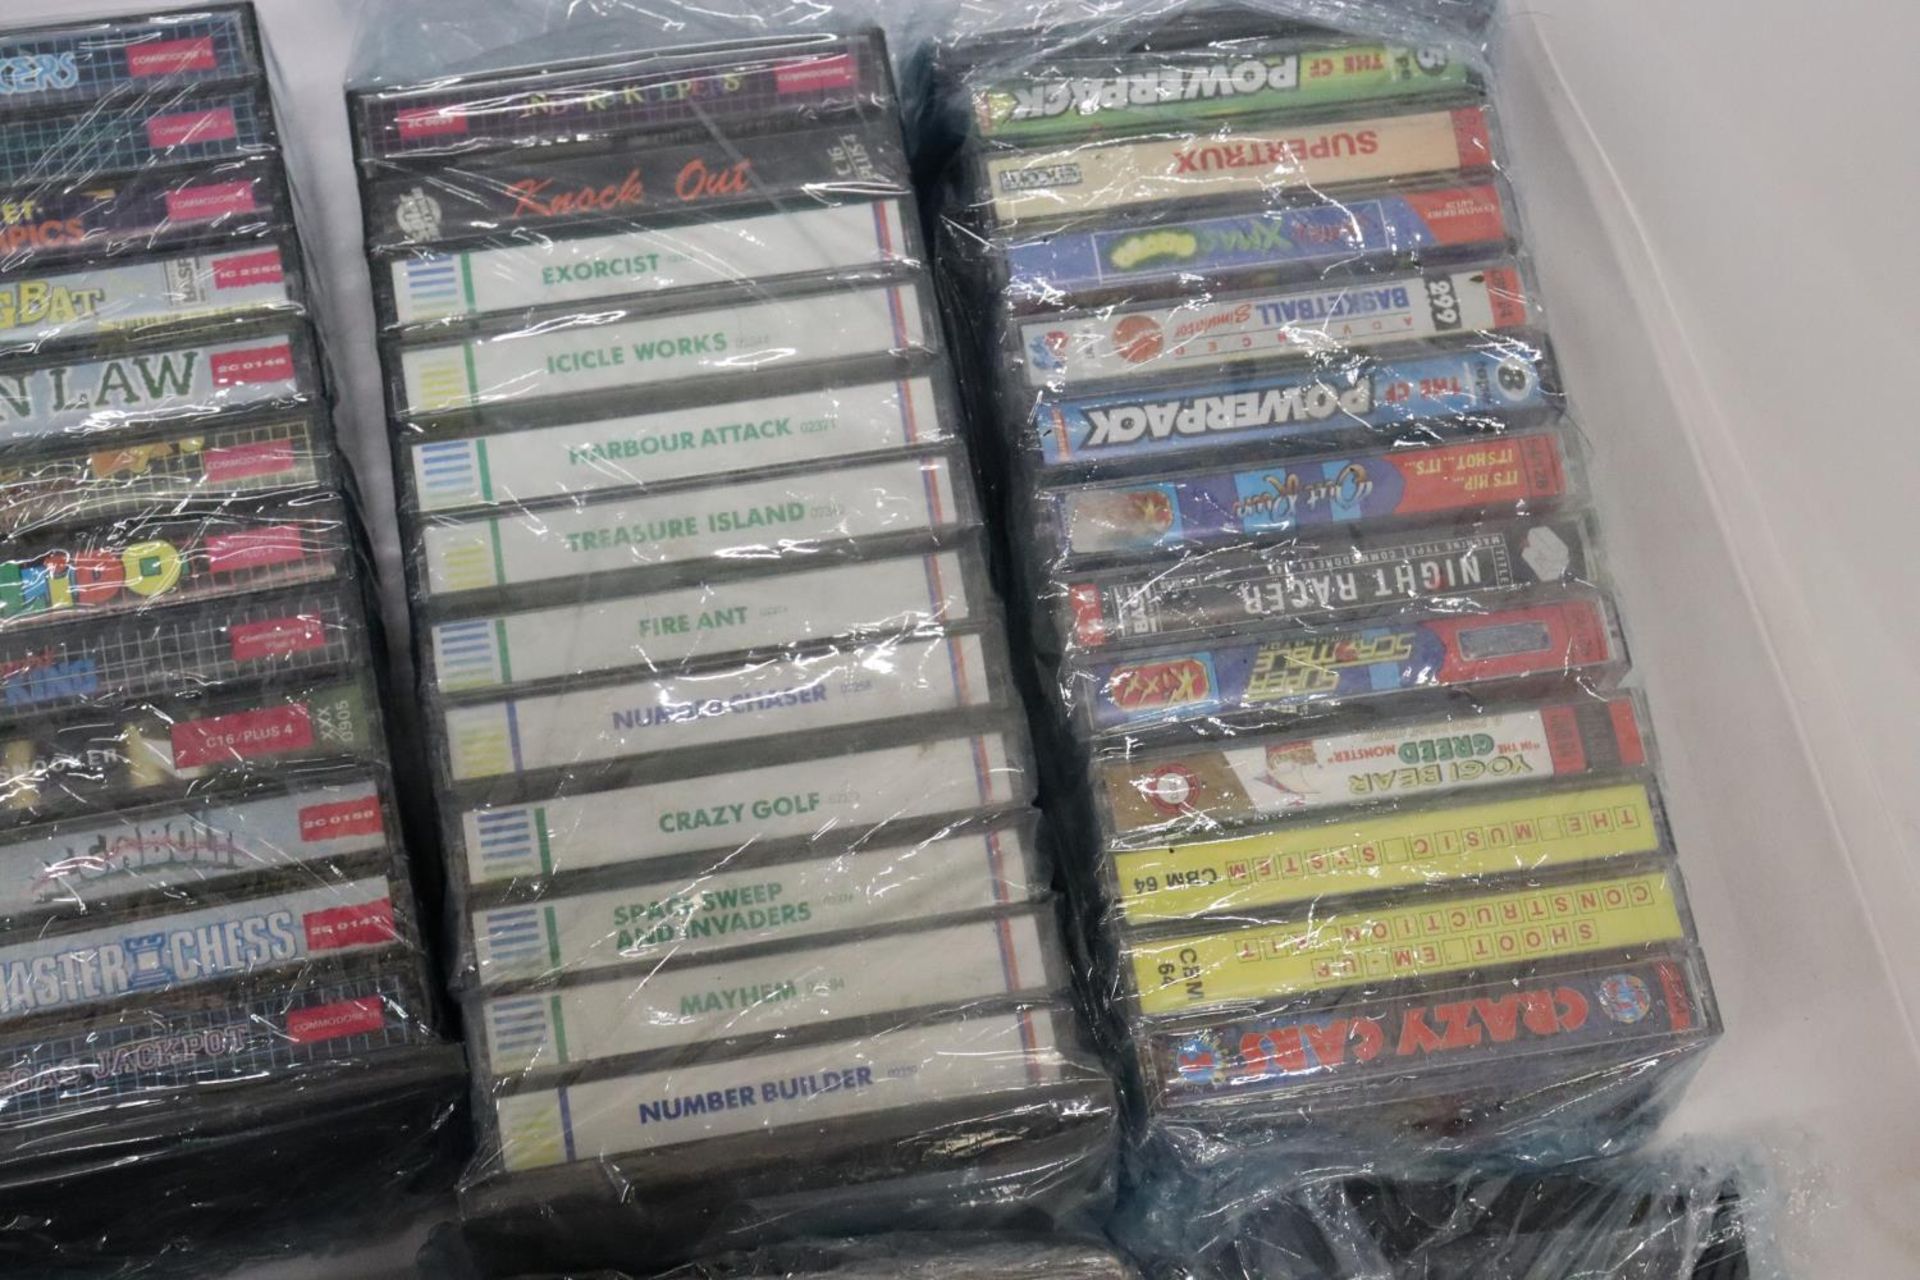 A COMMODORE DATASSETTE 1531 PLUS A LARGE QUANTITY OF COMMODORE 64 GAMES - Image 4 of 8